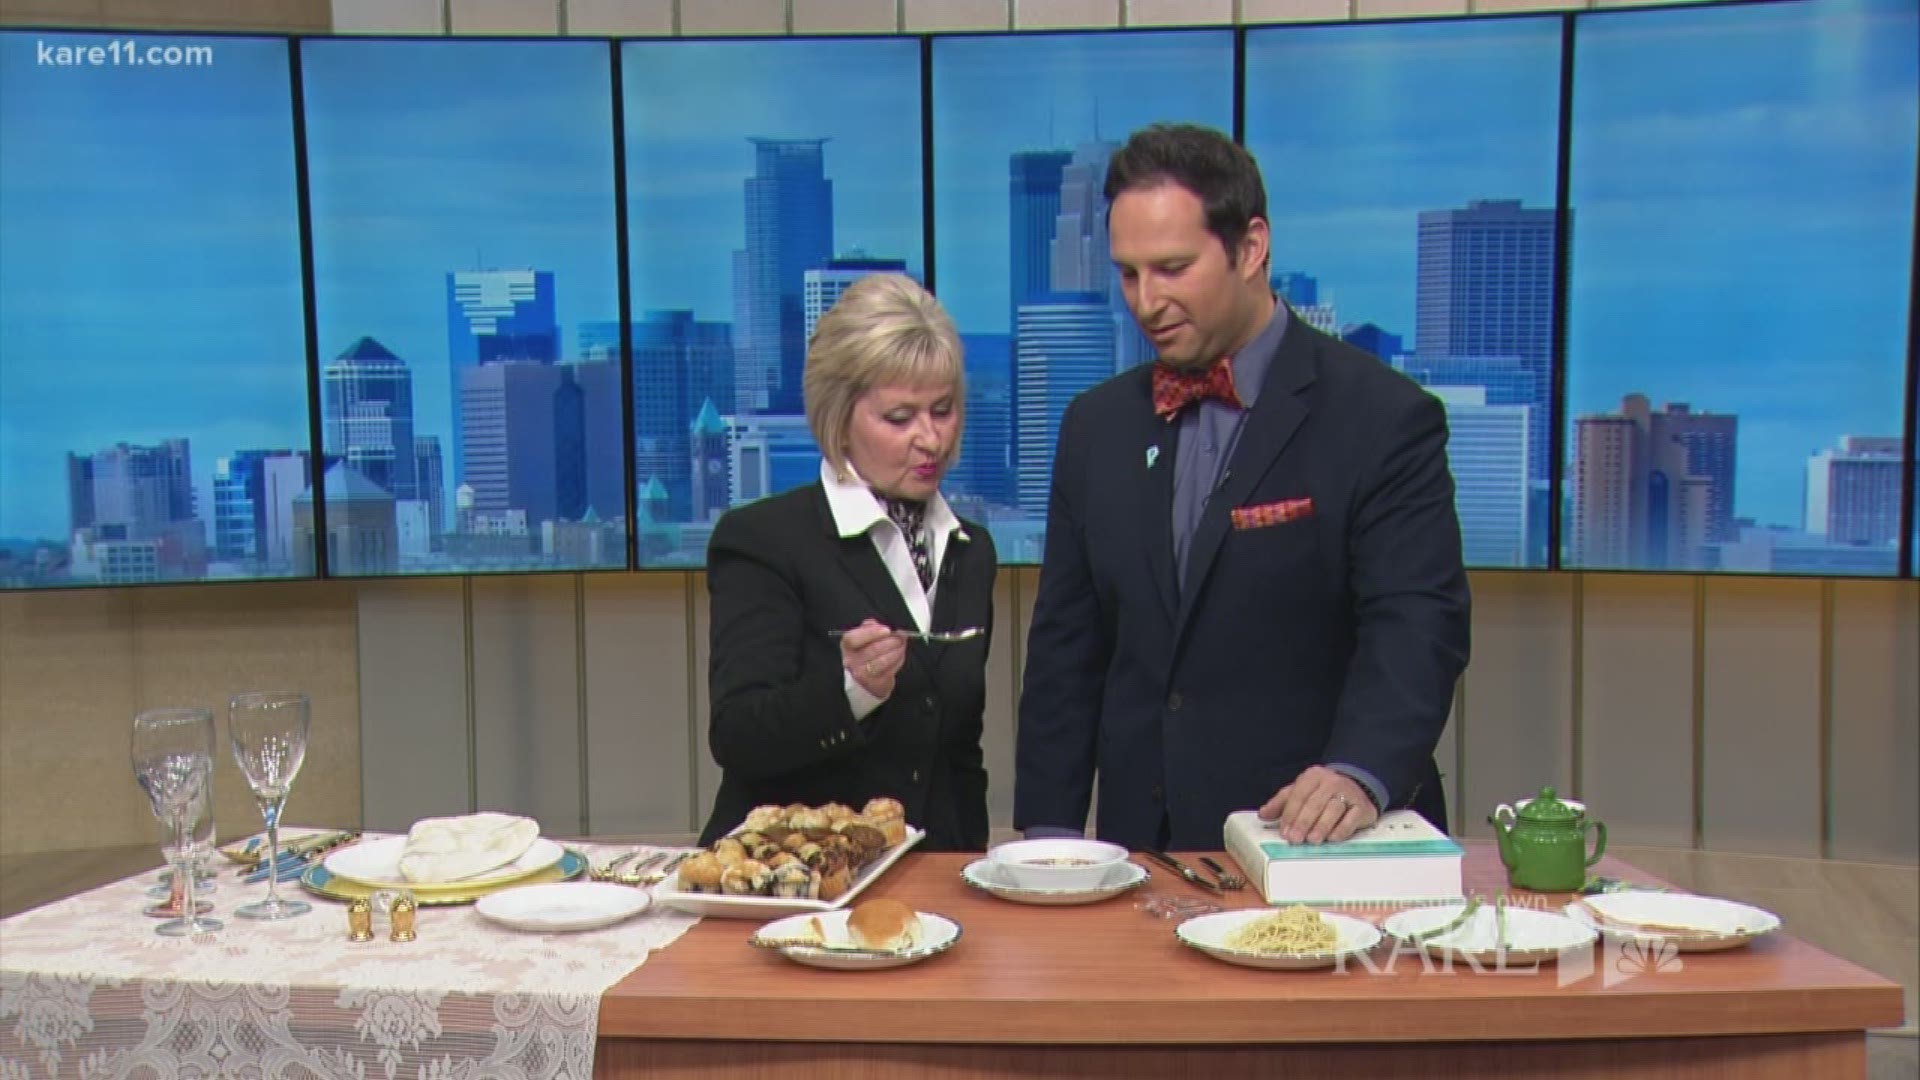 Julie Frantz from St. Paul Hotel teaches Dave how to eat simple dishes, like a roll and soup.